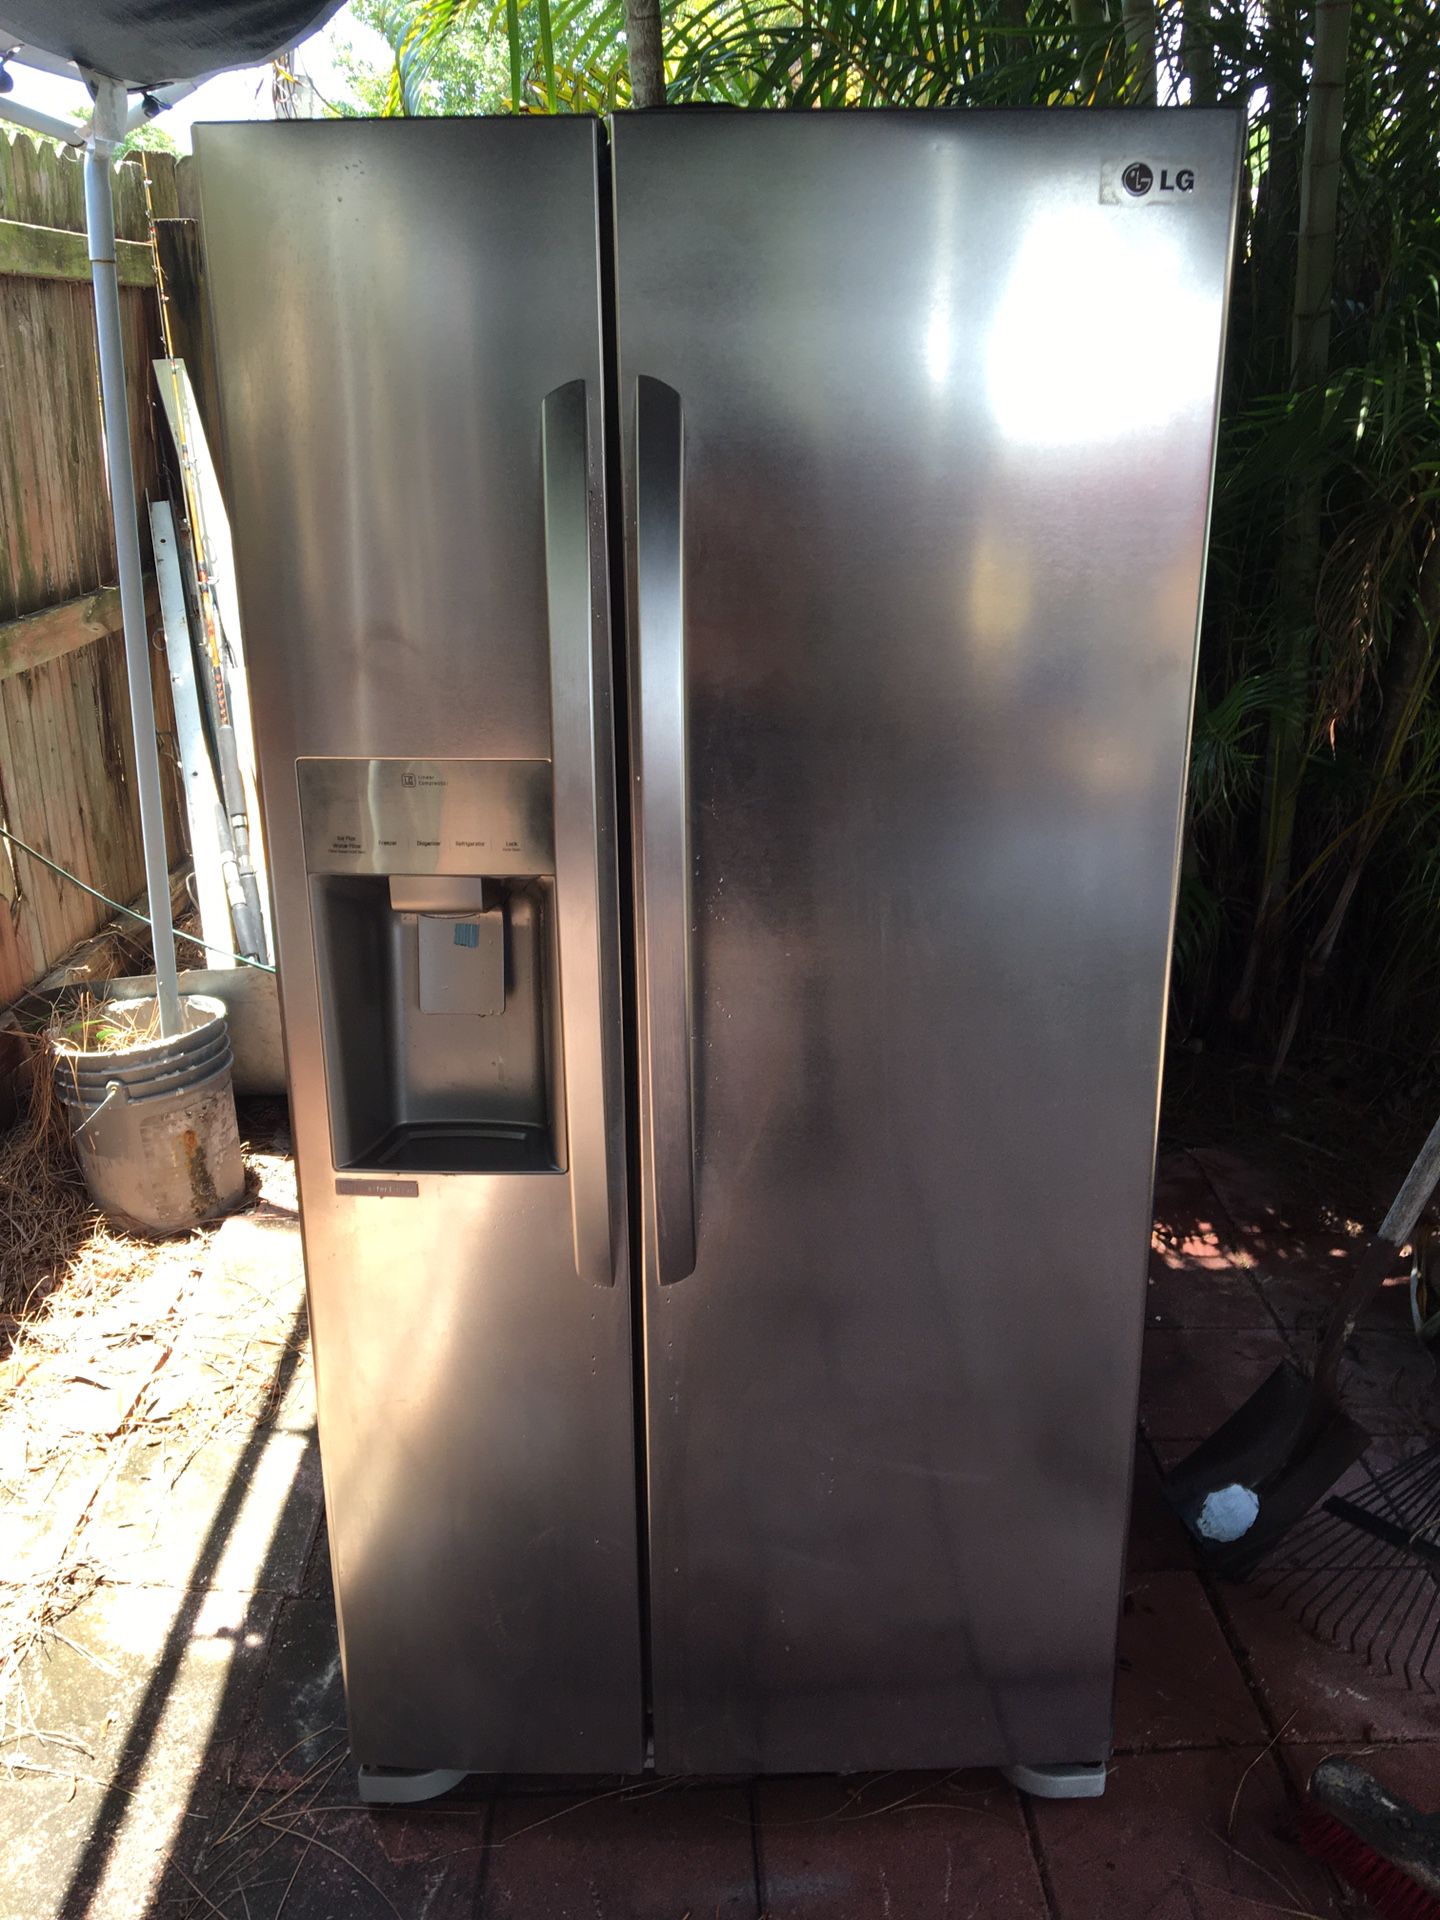 LG STAINLESS STEEL FRIDGE WORKS PERFECT 32.5" WIDE 67" TALL REFRIGERATOR